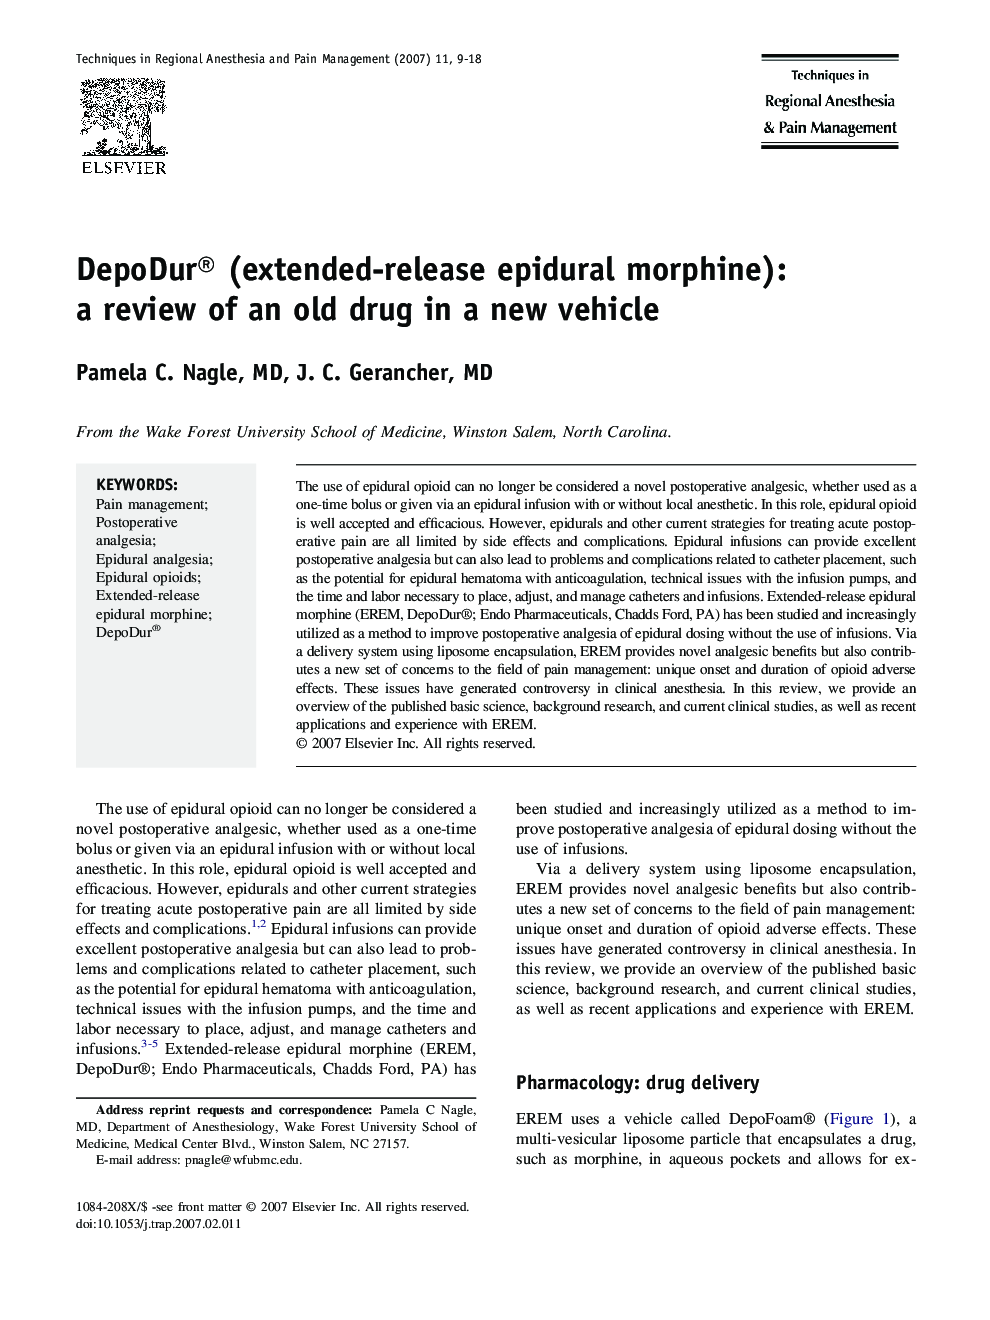 DepoDur® (extended-release epidural morphine): a review of an old drug in a new vehicle